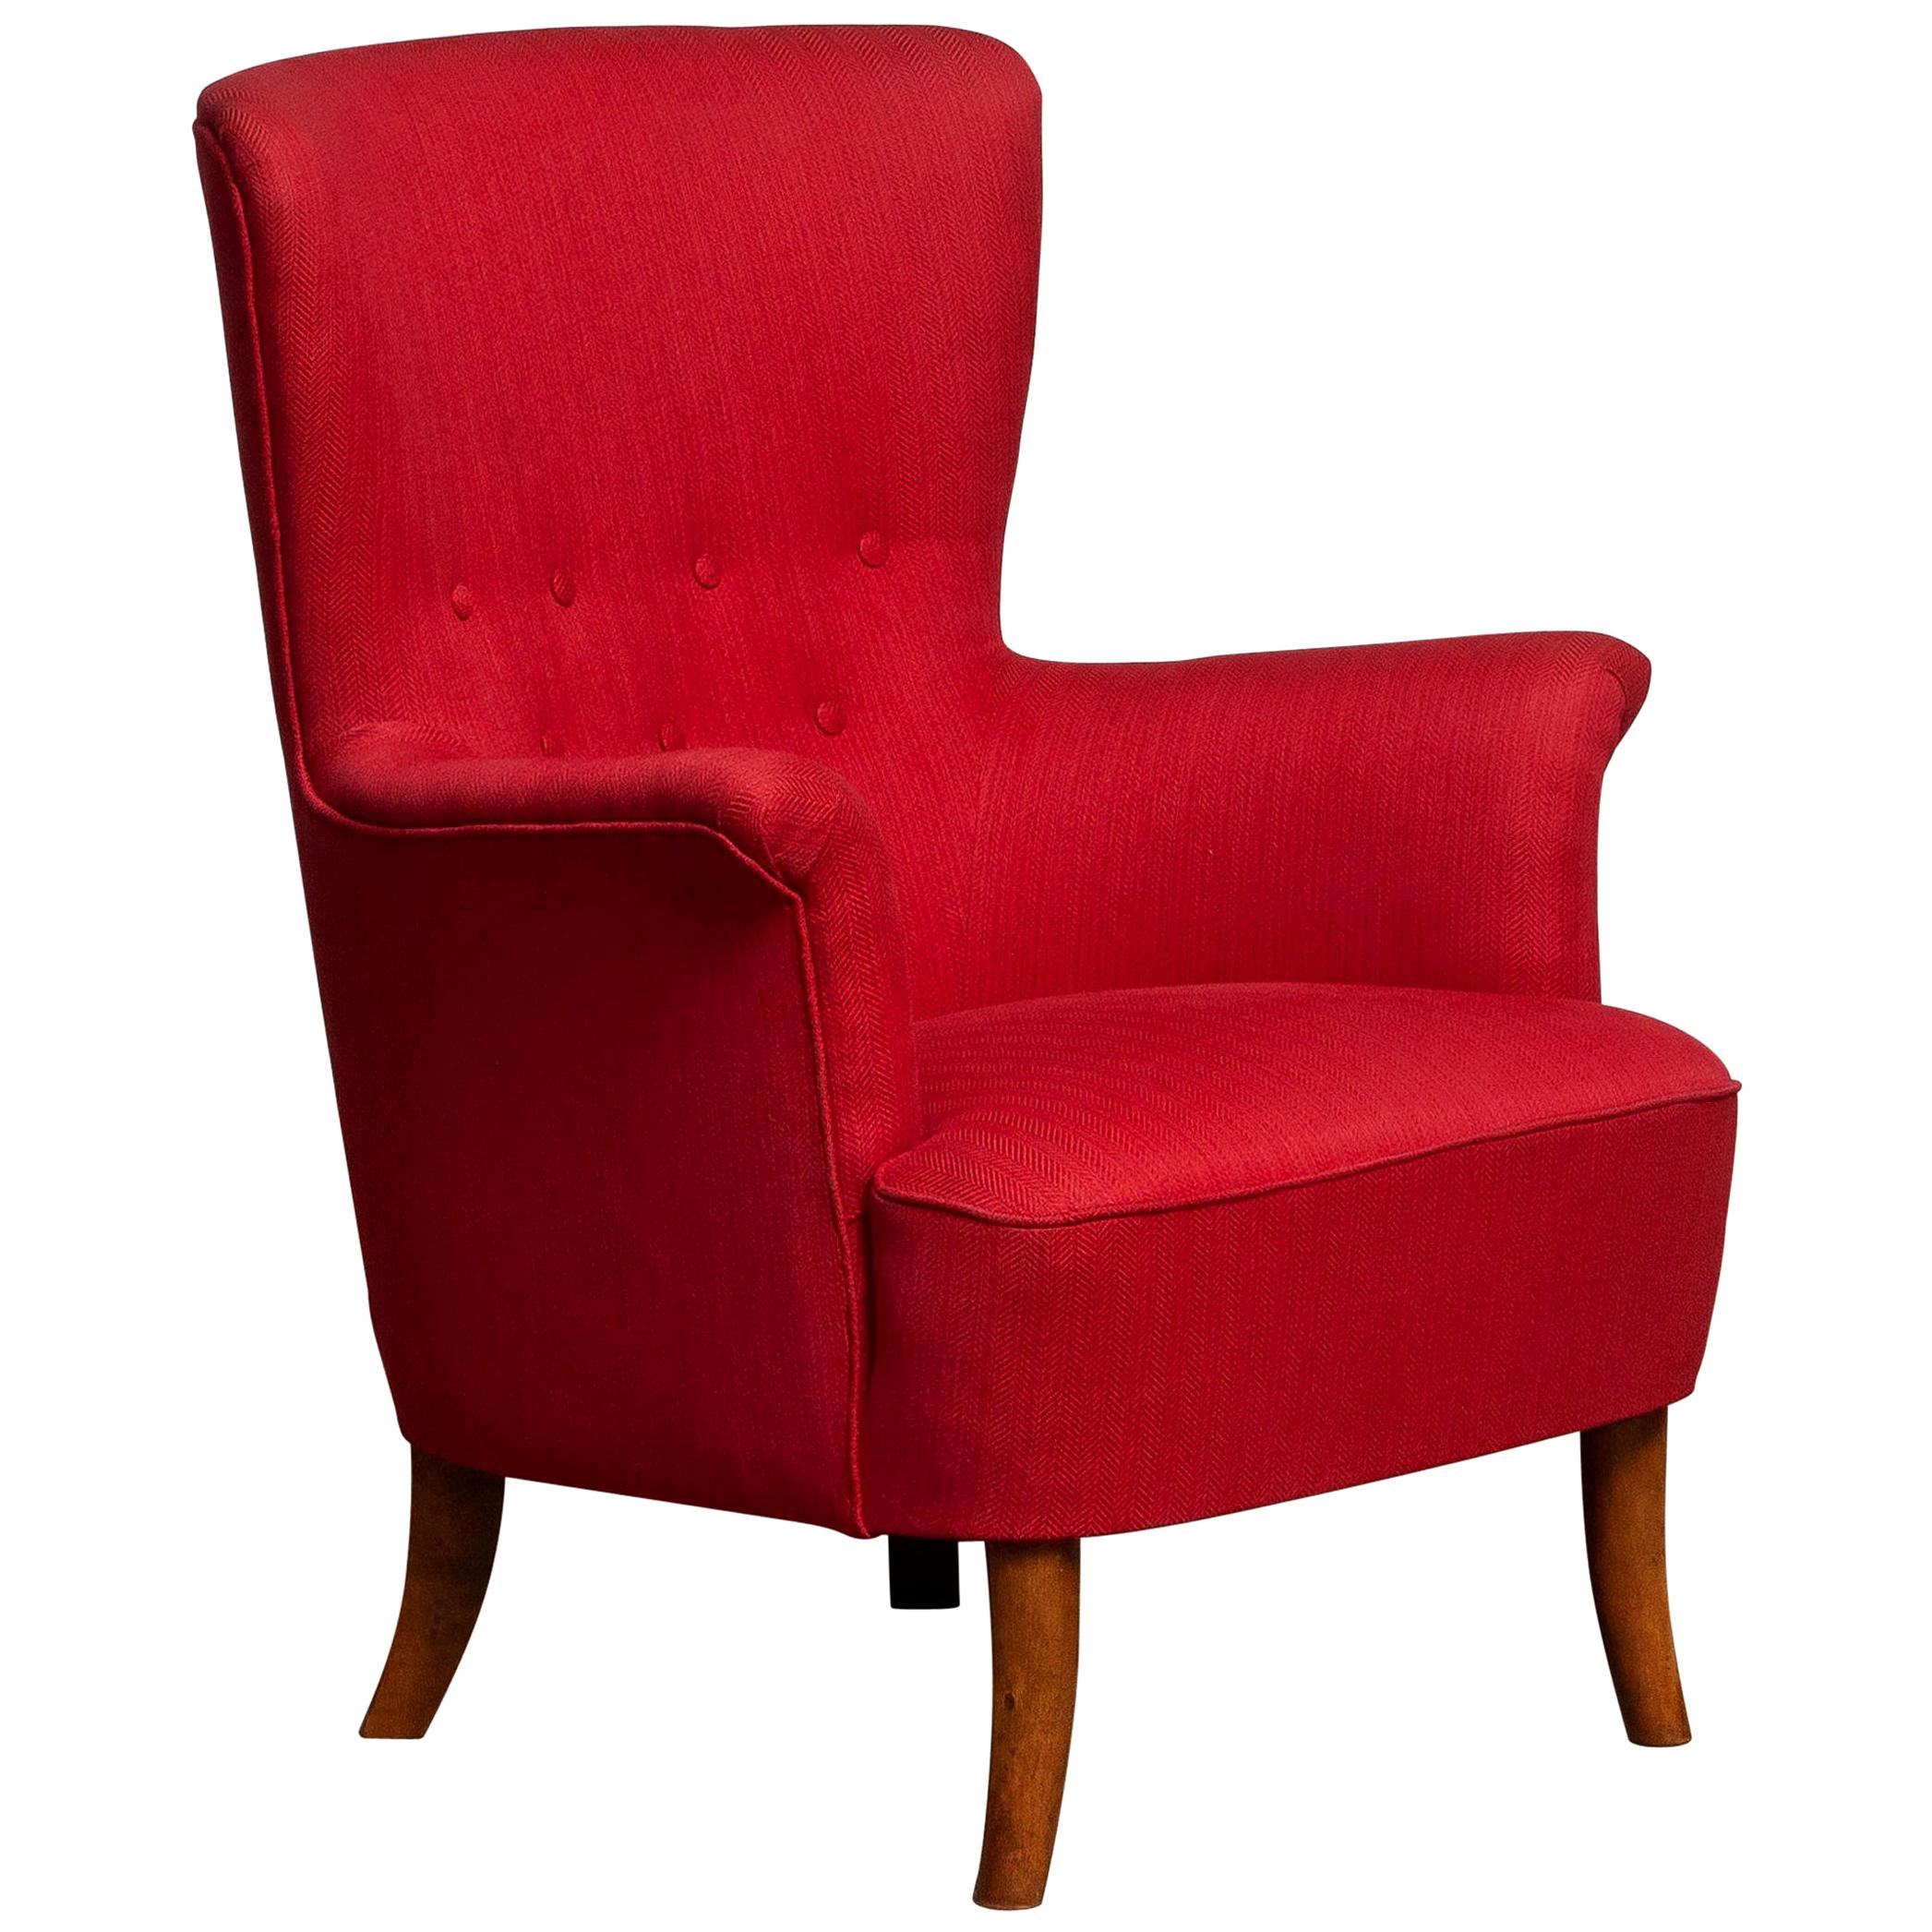 Beautiful fuchsia / red easy or lounge chair designed by Carl Malmsten for OH Sjogren, Sweden.
The overall condition is good
Period: 1940-1949.
 